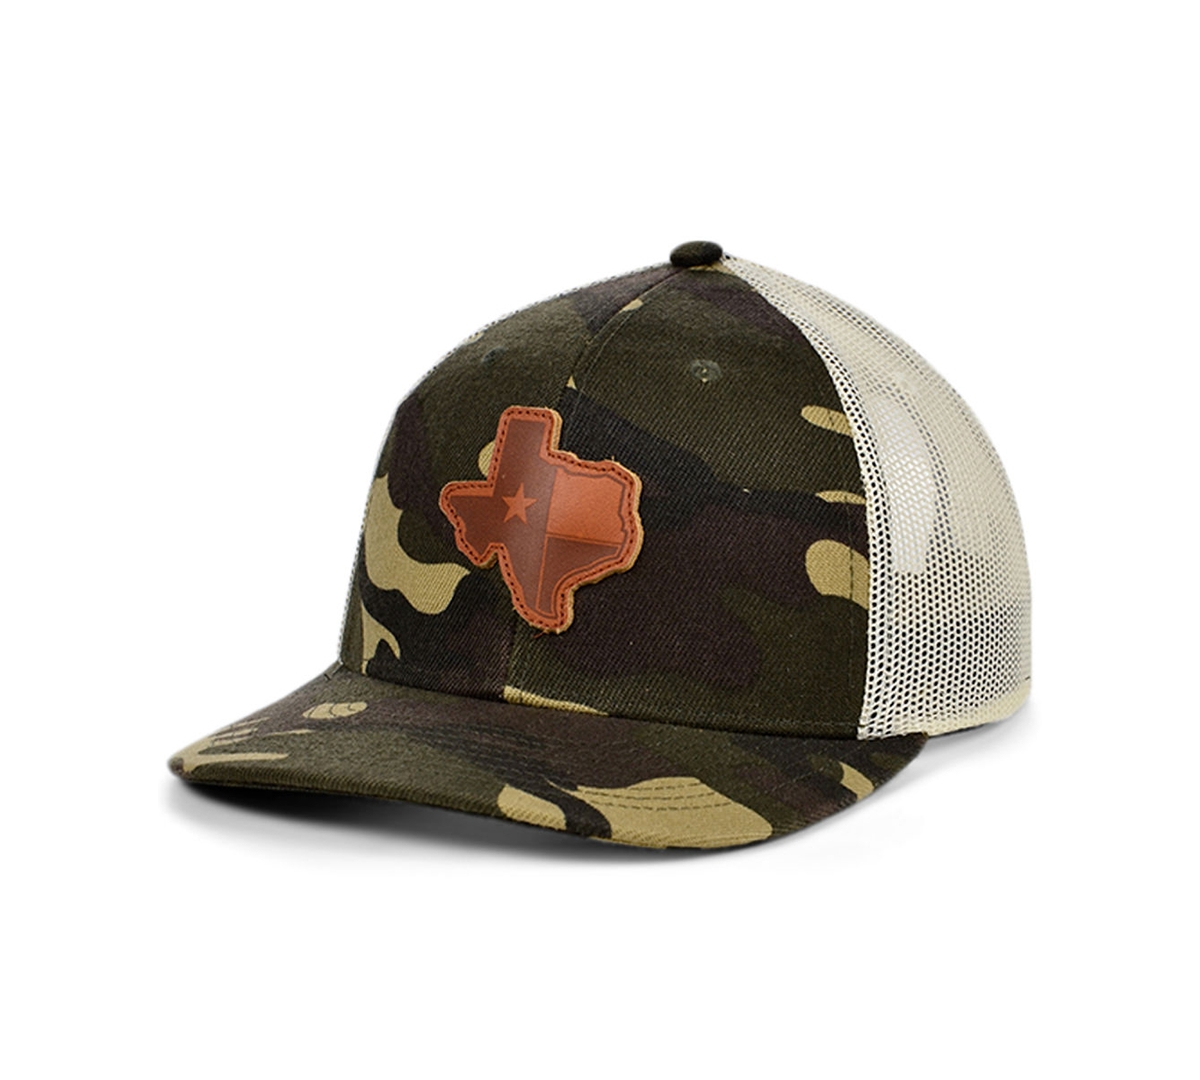 Local Crowns Texas Woodland State Patch Curved Trucker Cap - WoodlandCamo/Ivory/Brown